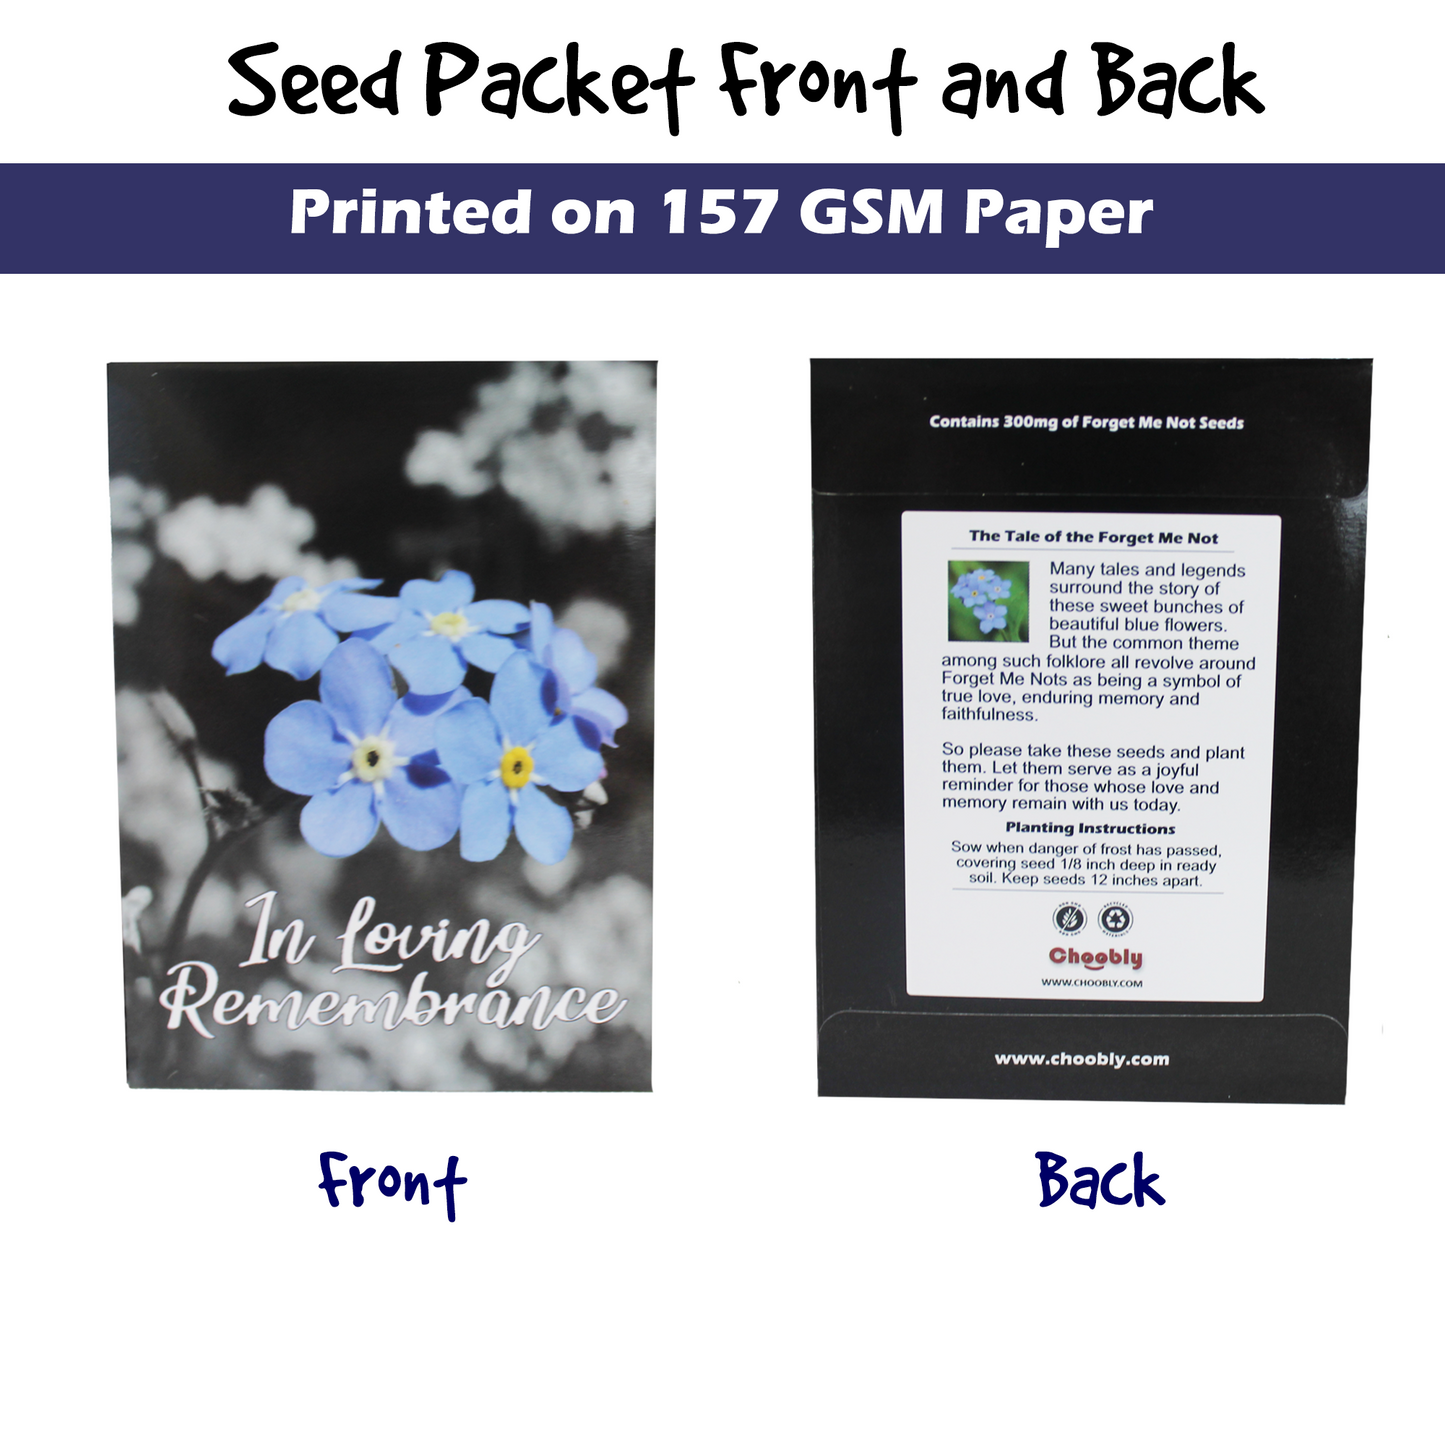 20pc Pre-Filled Seed Packet ''in Loving Remembrance'' Funeral Favors for Guests, Memorial Services, Celebration of Life, Forget Me Not Seed, Decorations, Sympathy, Memory, Flowers, Forgetmenot (20)…